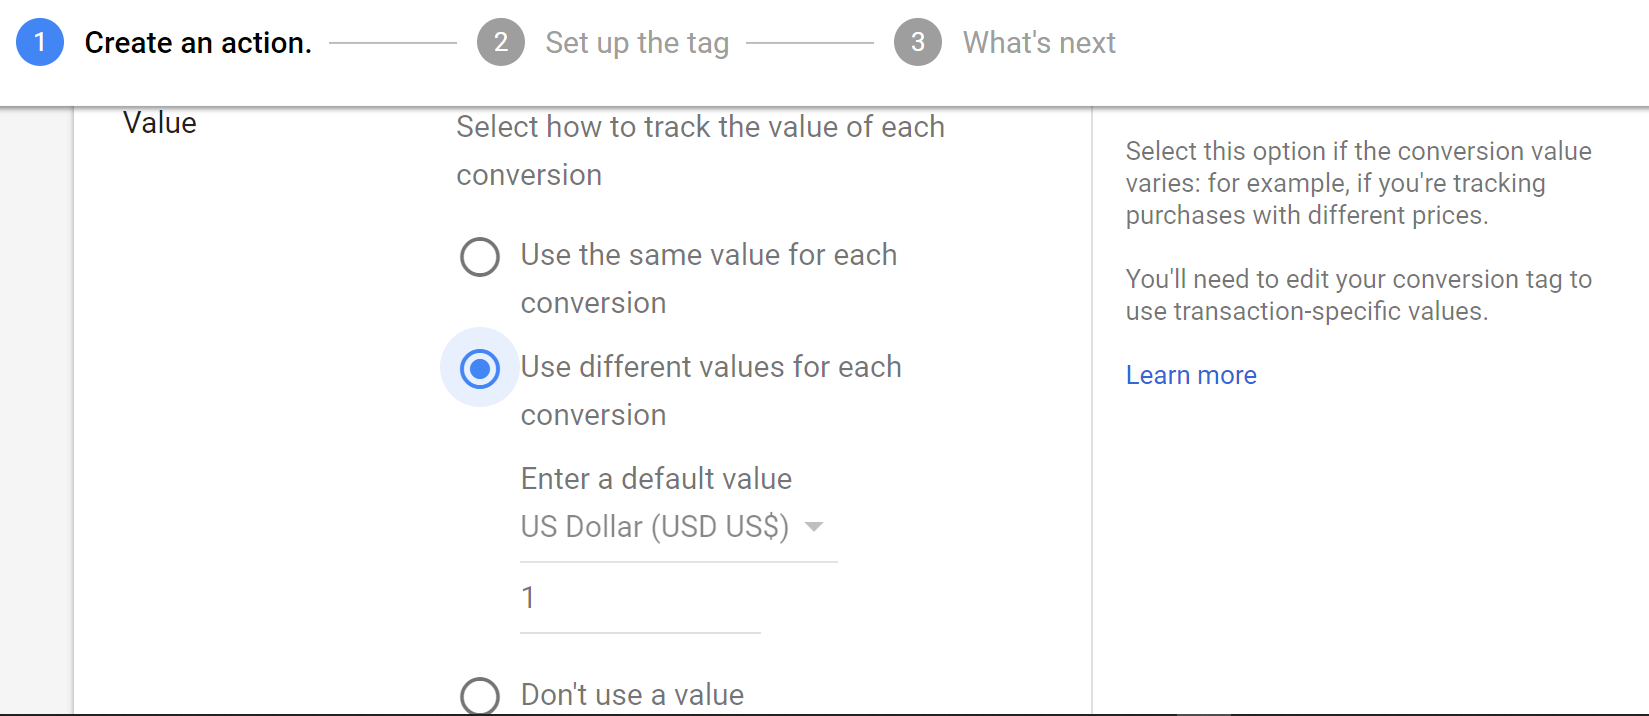 Choose "Use different values for each conversion," as the tracking code has to be dynamic.